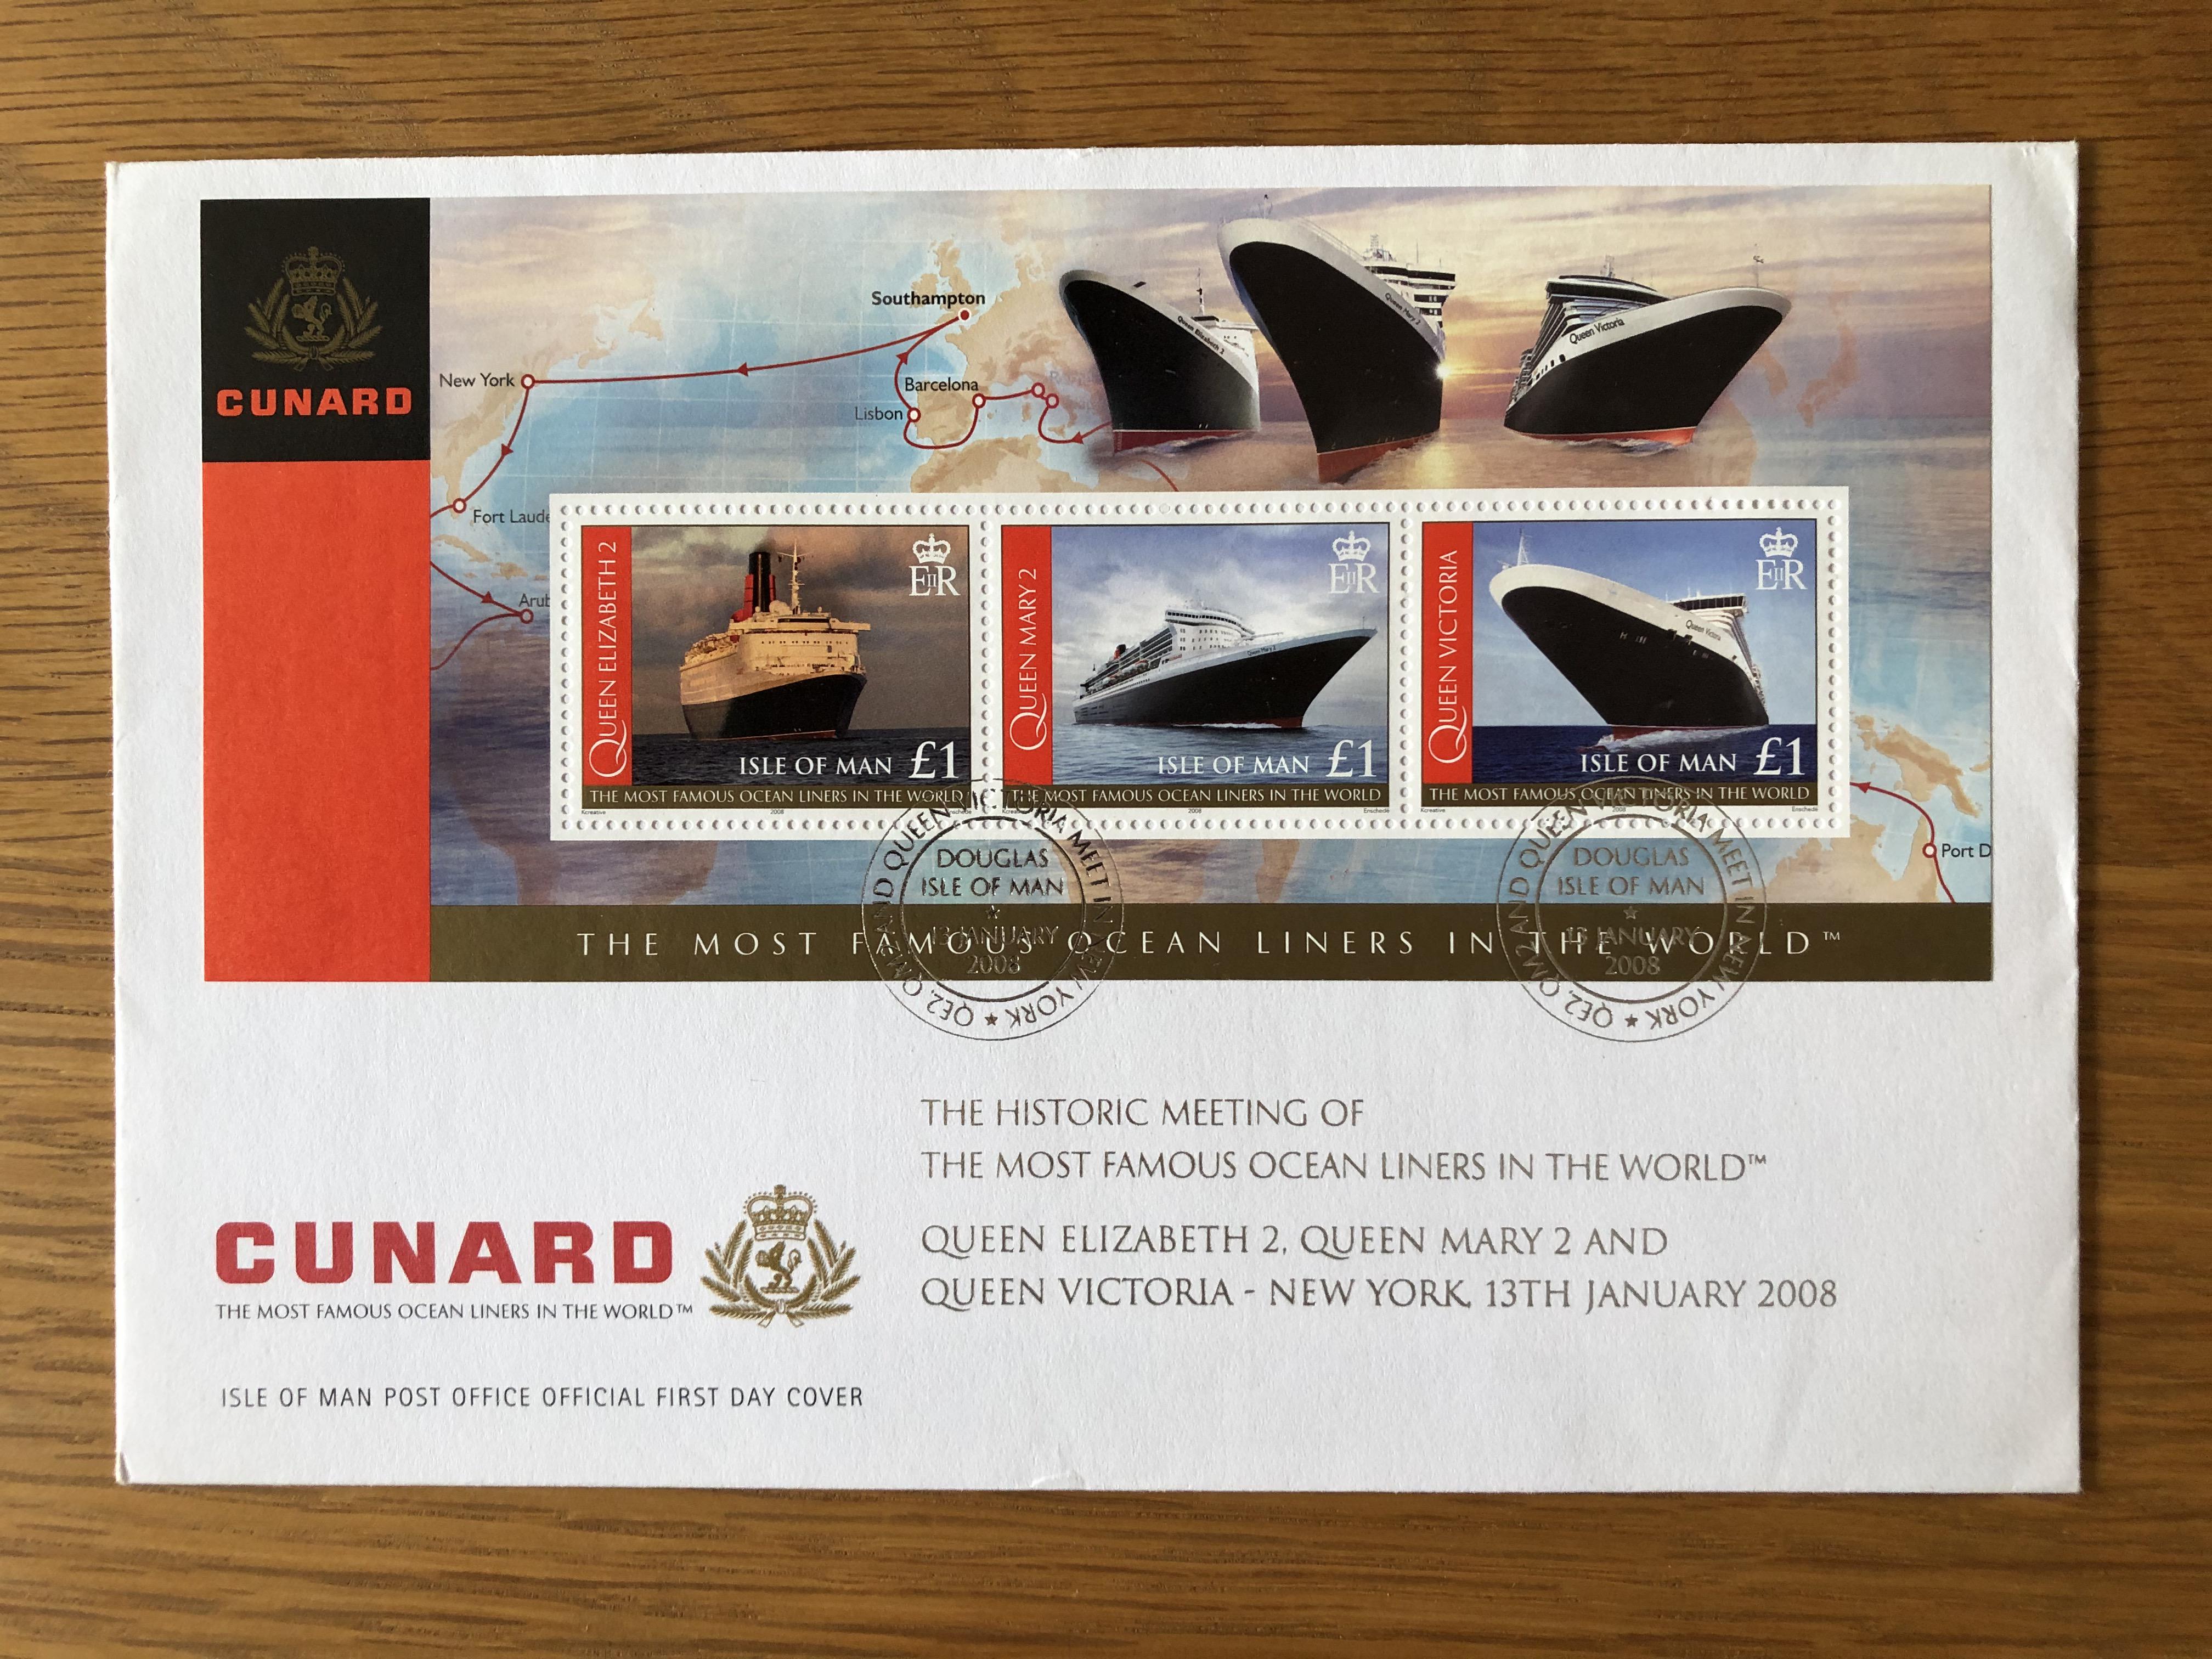 A SET OF FIRST DAY STAMPS FROM THE GATHERING OF THE 3 CUNARD QUEENS AT SOUTHAMPTON